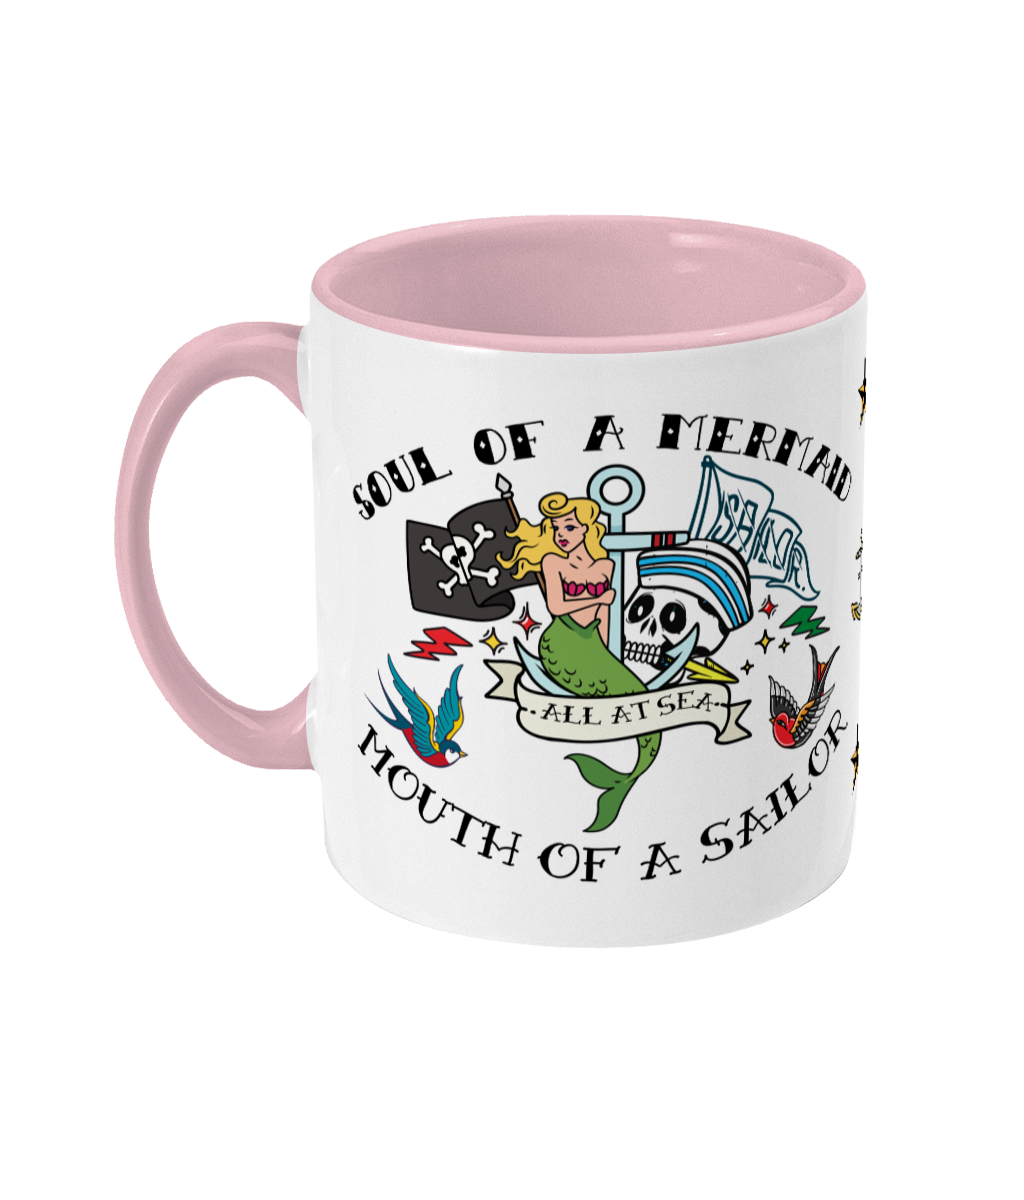 Sailor tattoo mug, Soul of a mermaid, mouth of a sailor Great Harbour Gifts